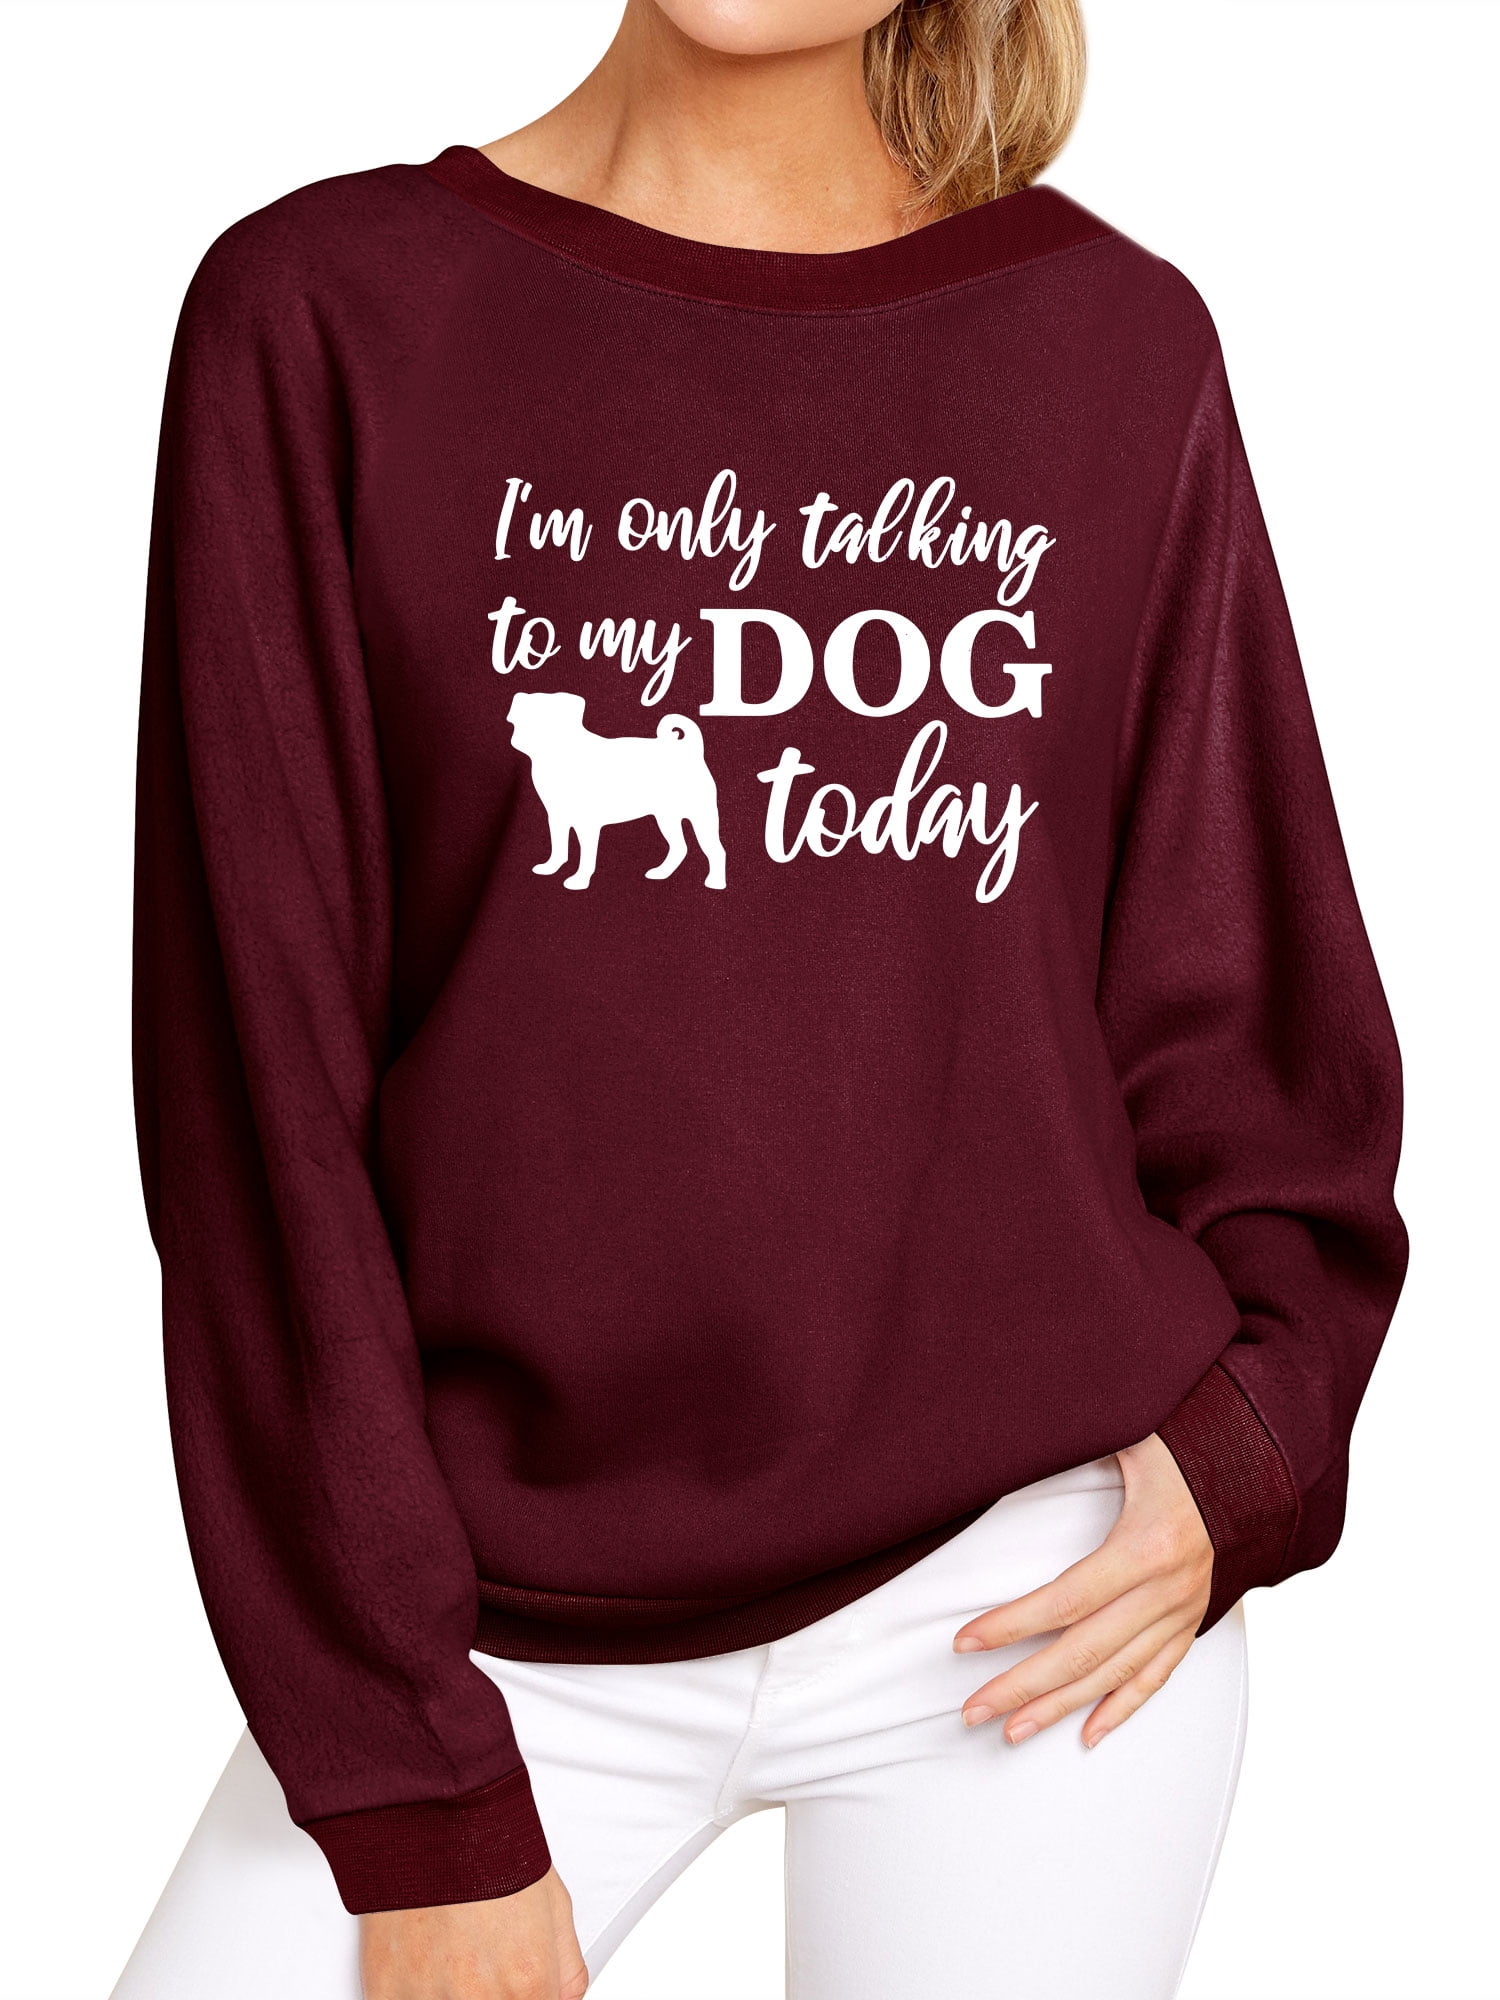 I/'m Only Talking to My Dog Today Women/'s Sweatshirt Novelty Letter Crewneck Shirt for Women